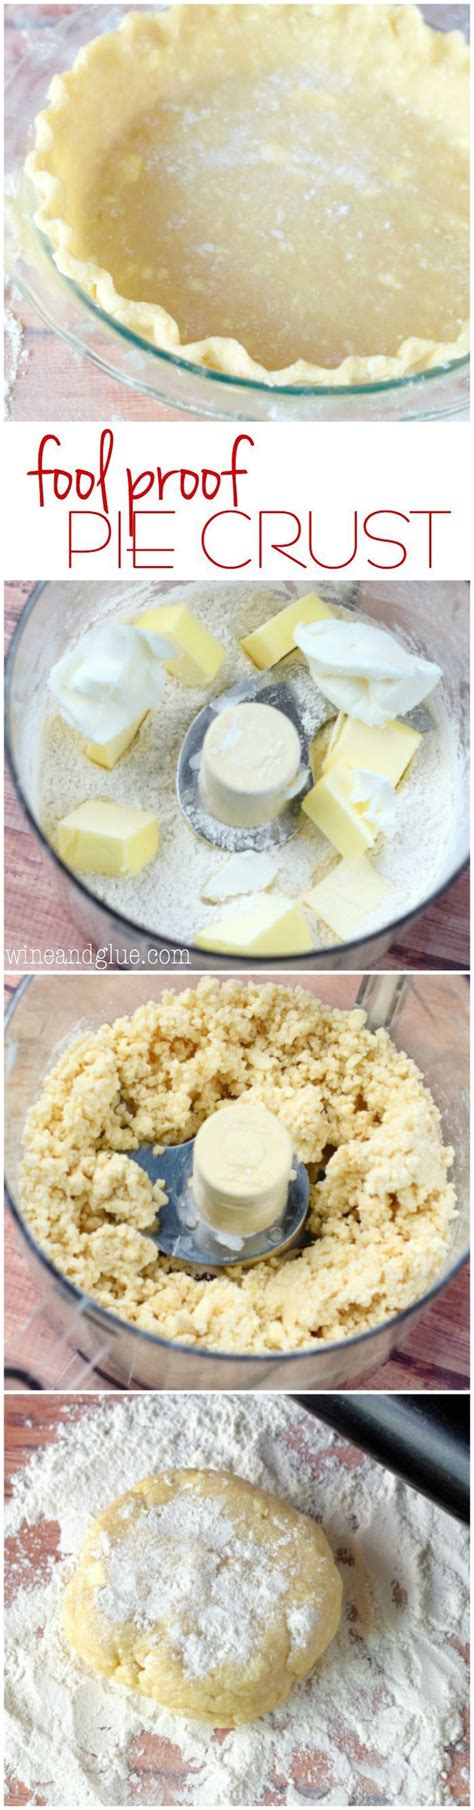 This pie crust is my personal favorite and is made using a food processor, which makes cutting the butter into the flour very simple. This Fool Proof Pie Crust is seriously so easy, moist and delicious! Step by step photo tutori ...